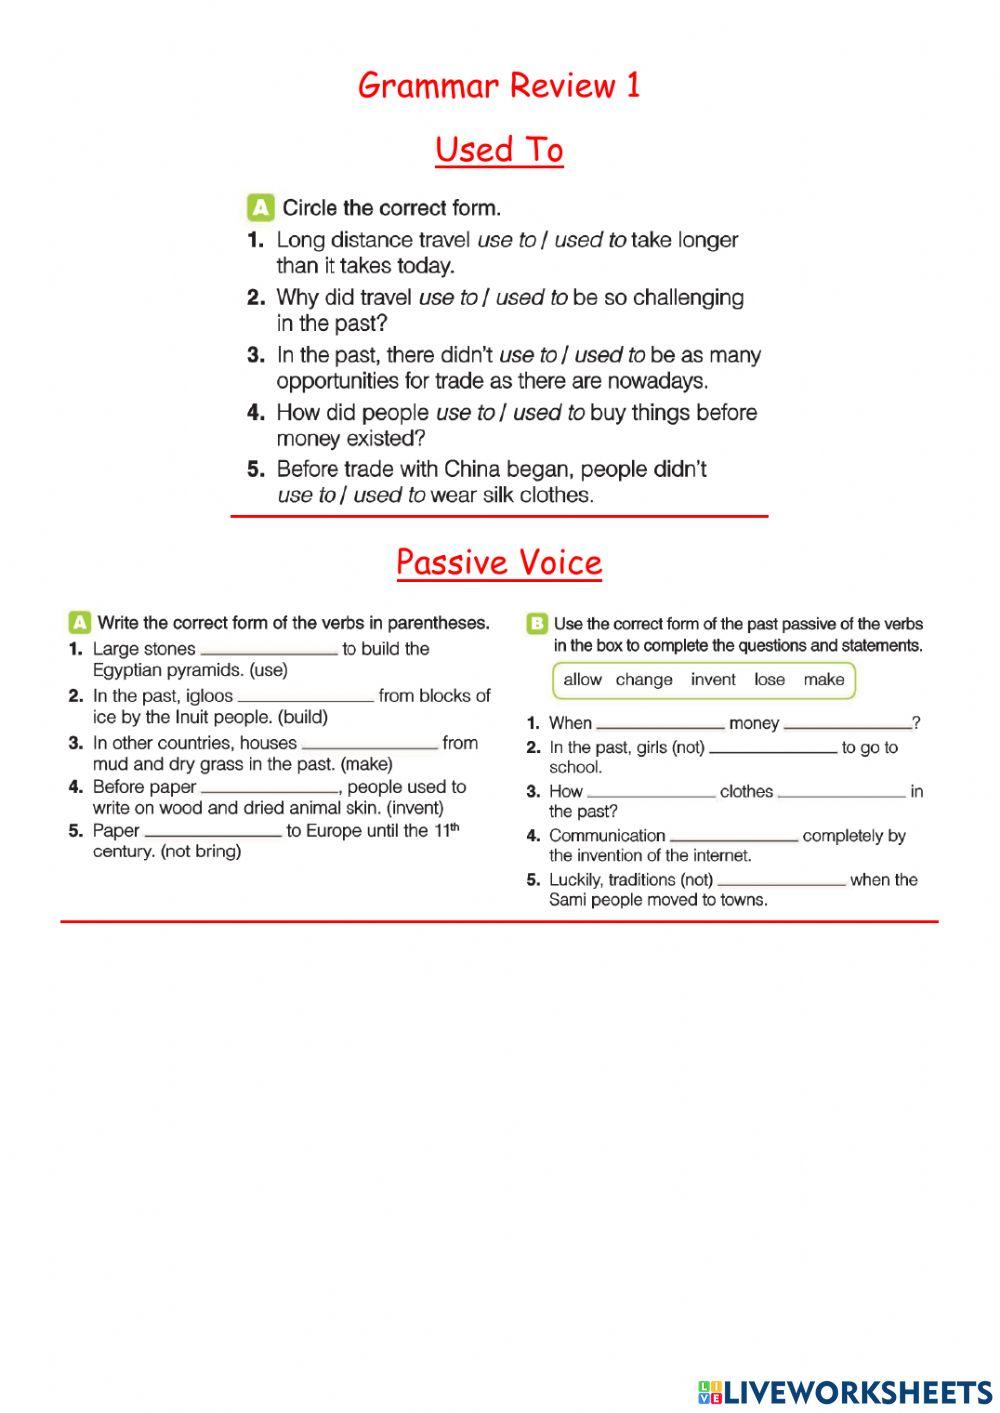 Used To - Passive Voice in the Past